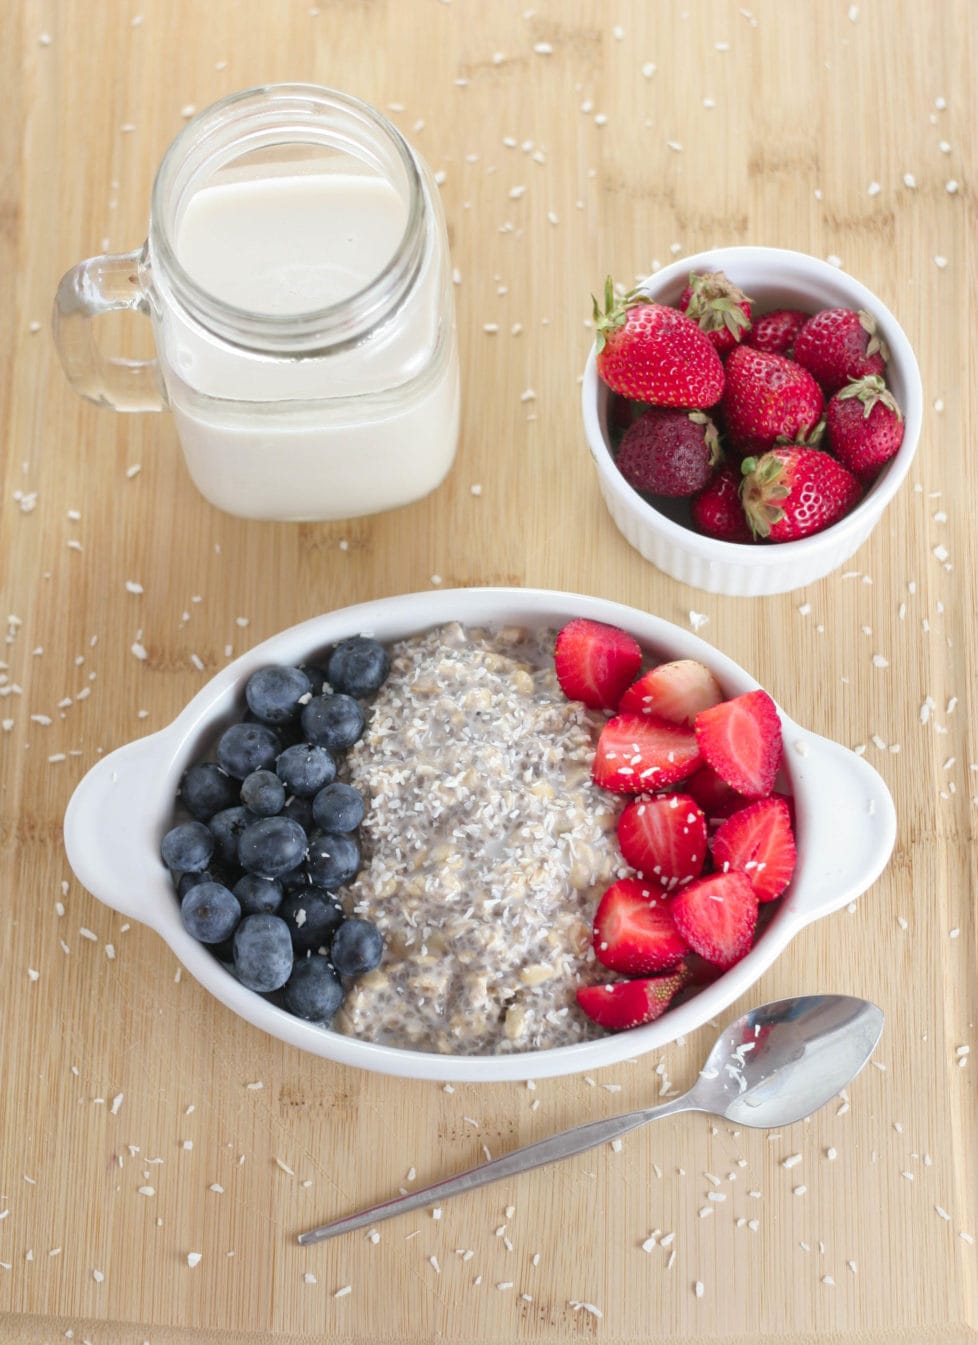 A bowl of overnight oats on a wooden table with berries and plant based milk